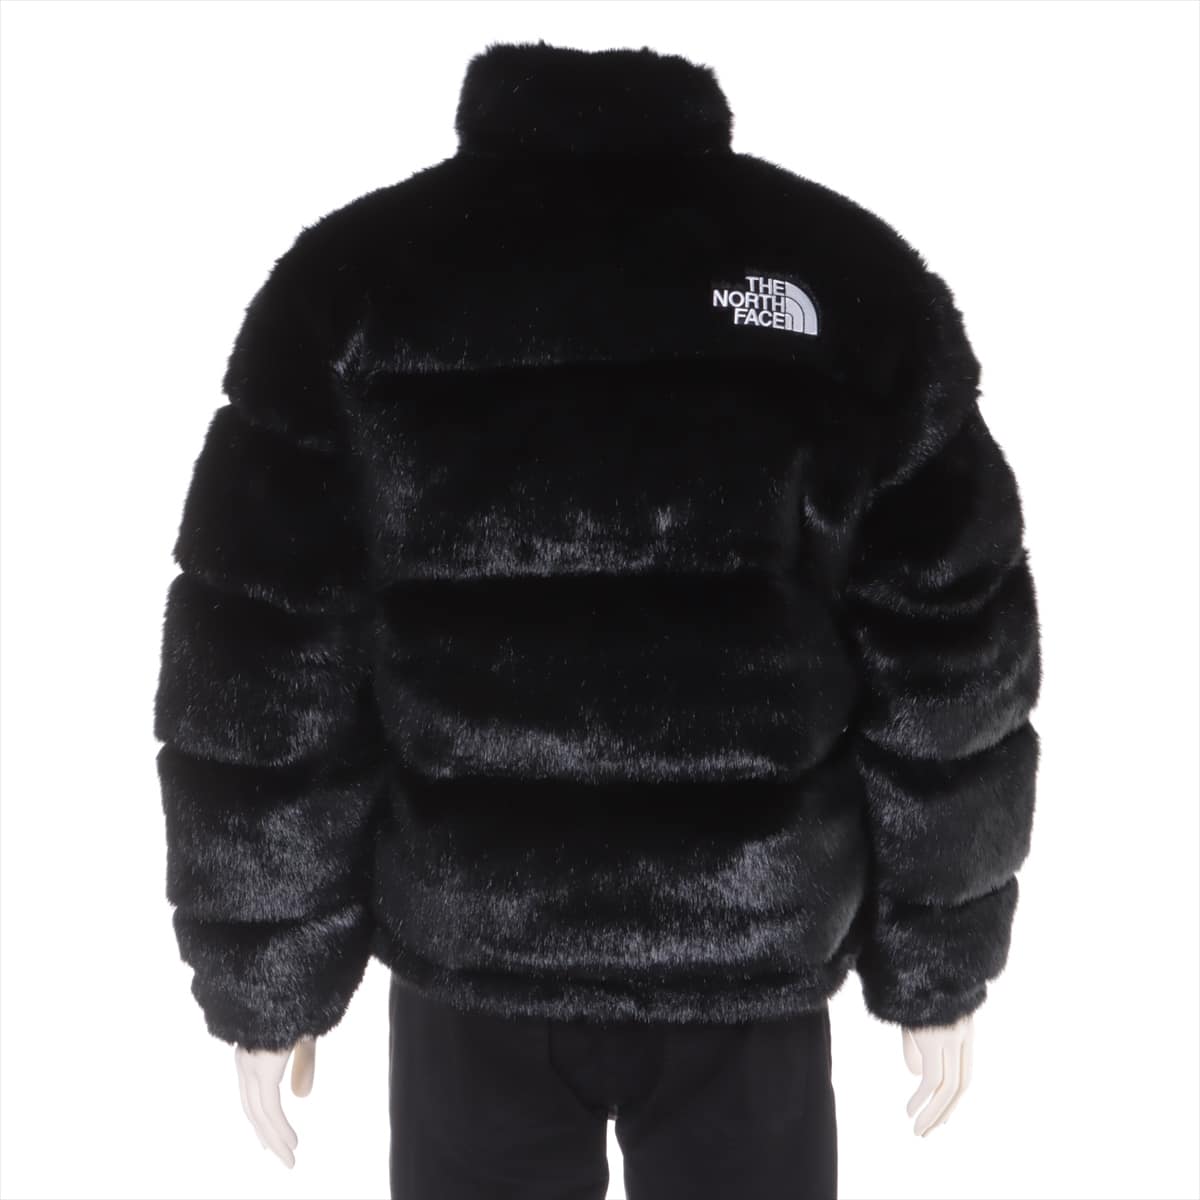 SUPREME × THE NORTH FACE 20AW Acrylic x polyester Jacket S Men's Black  ND92001I Faux Fur Nuptse Jacke